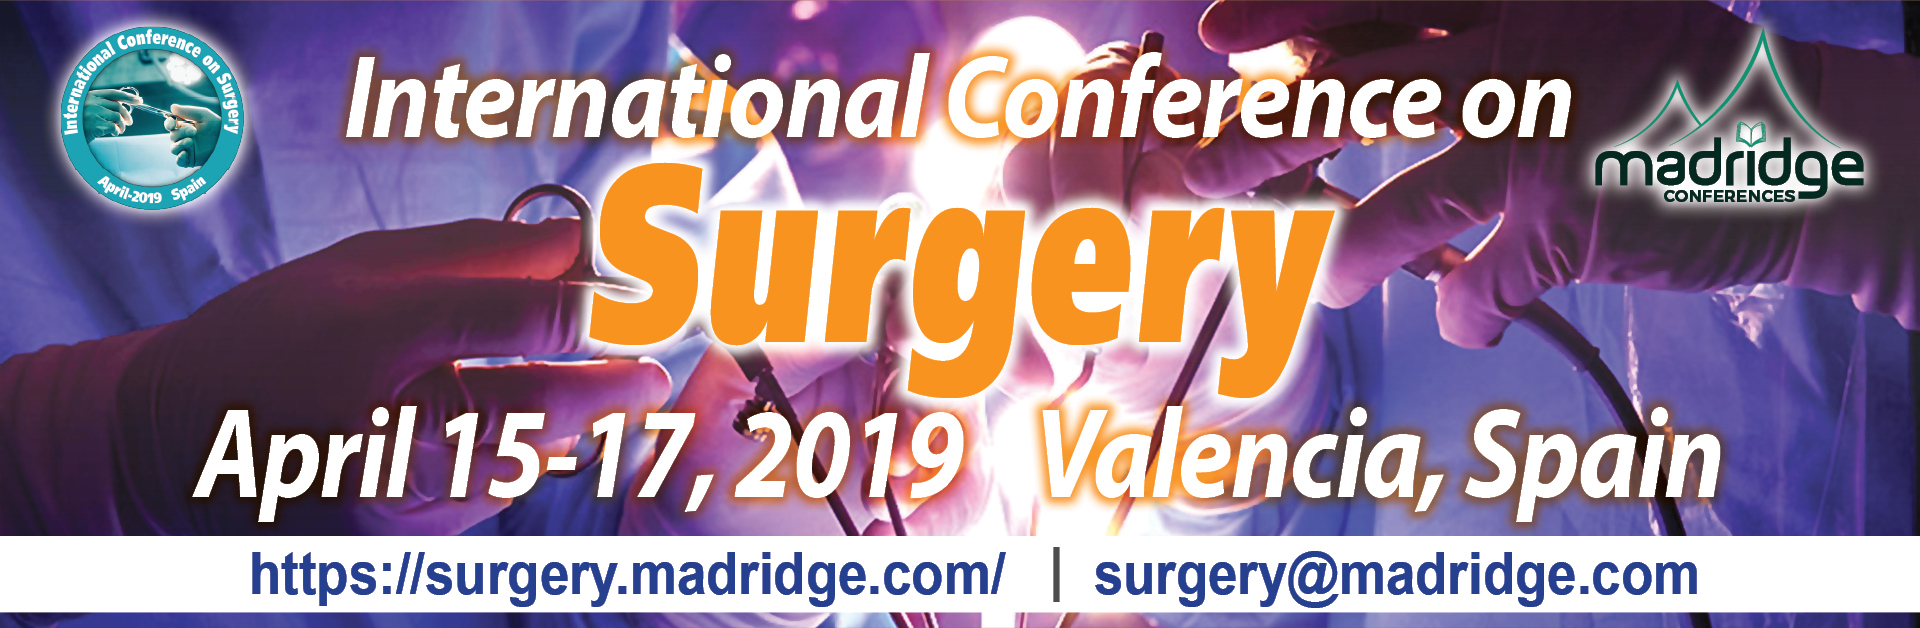 Photos of International Conference on Surgery